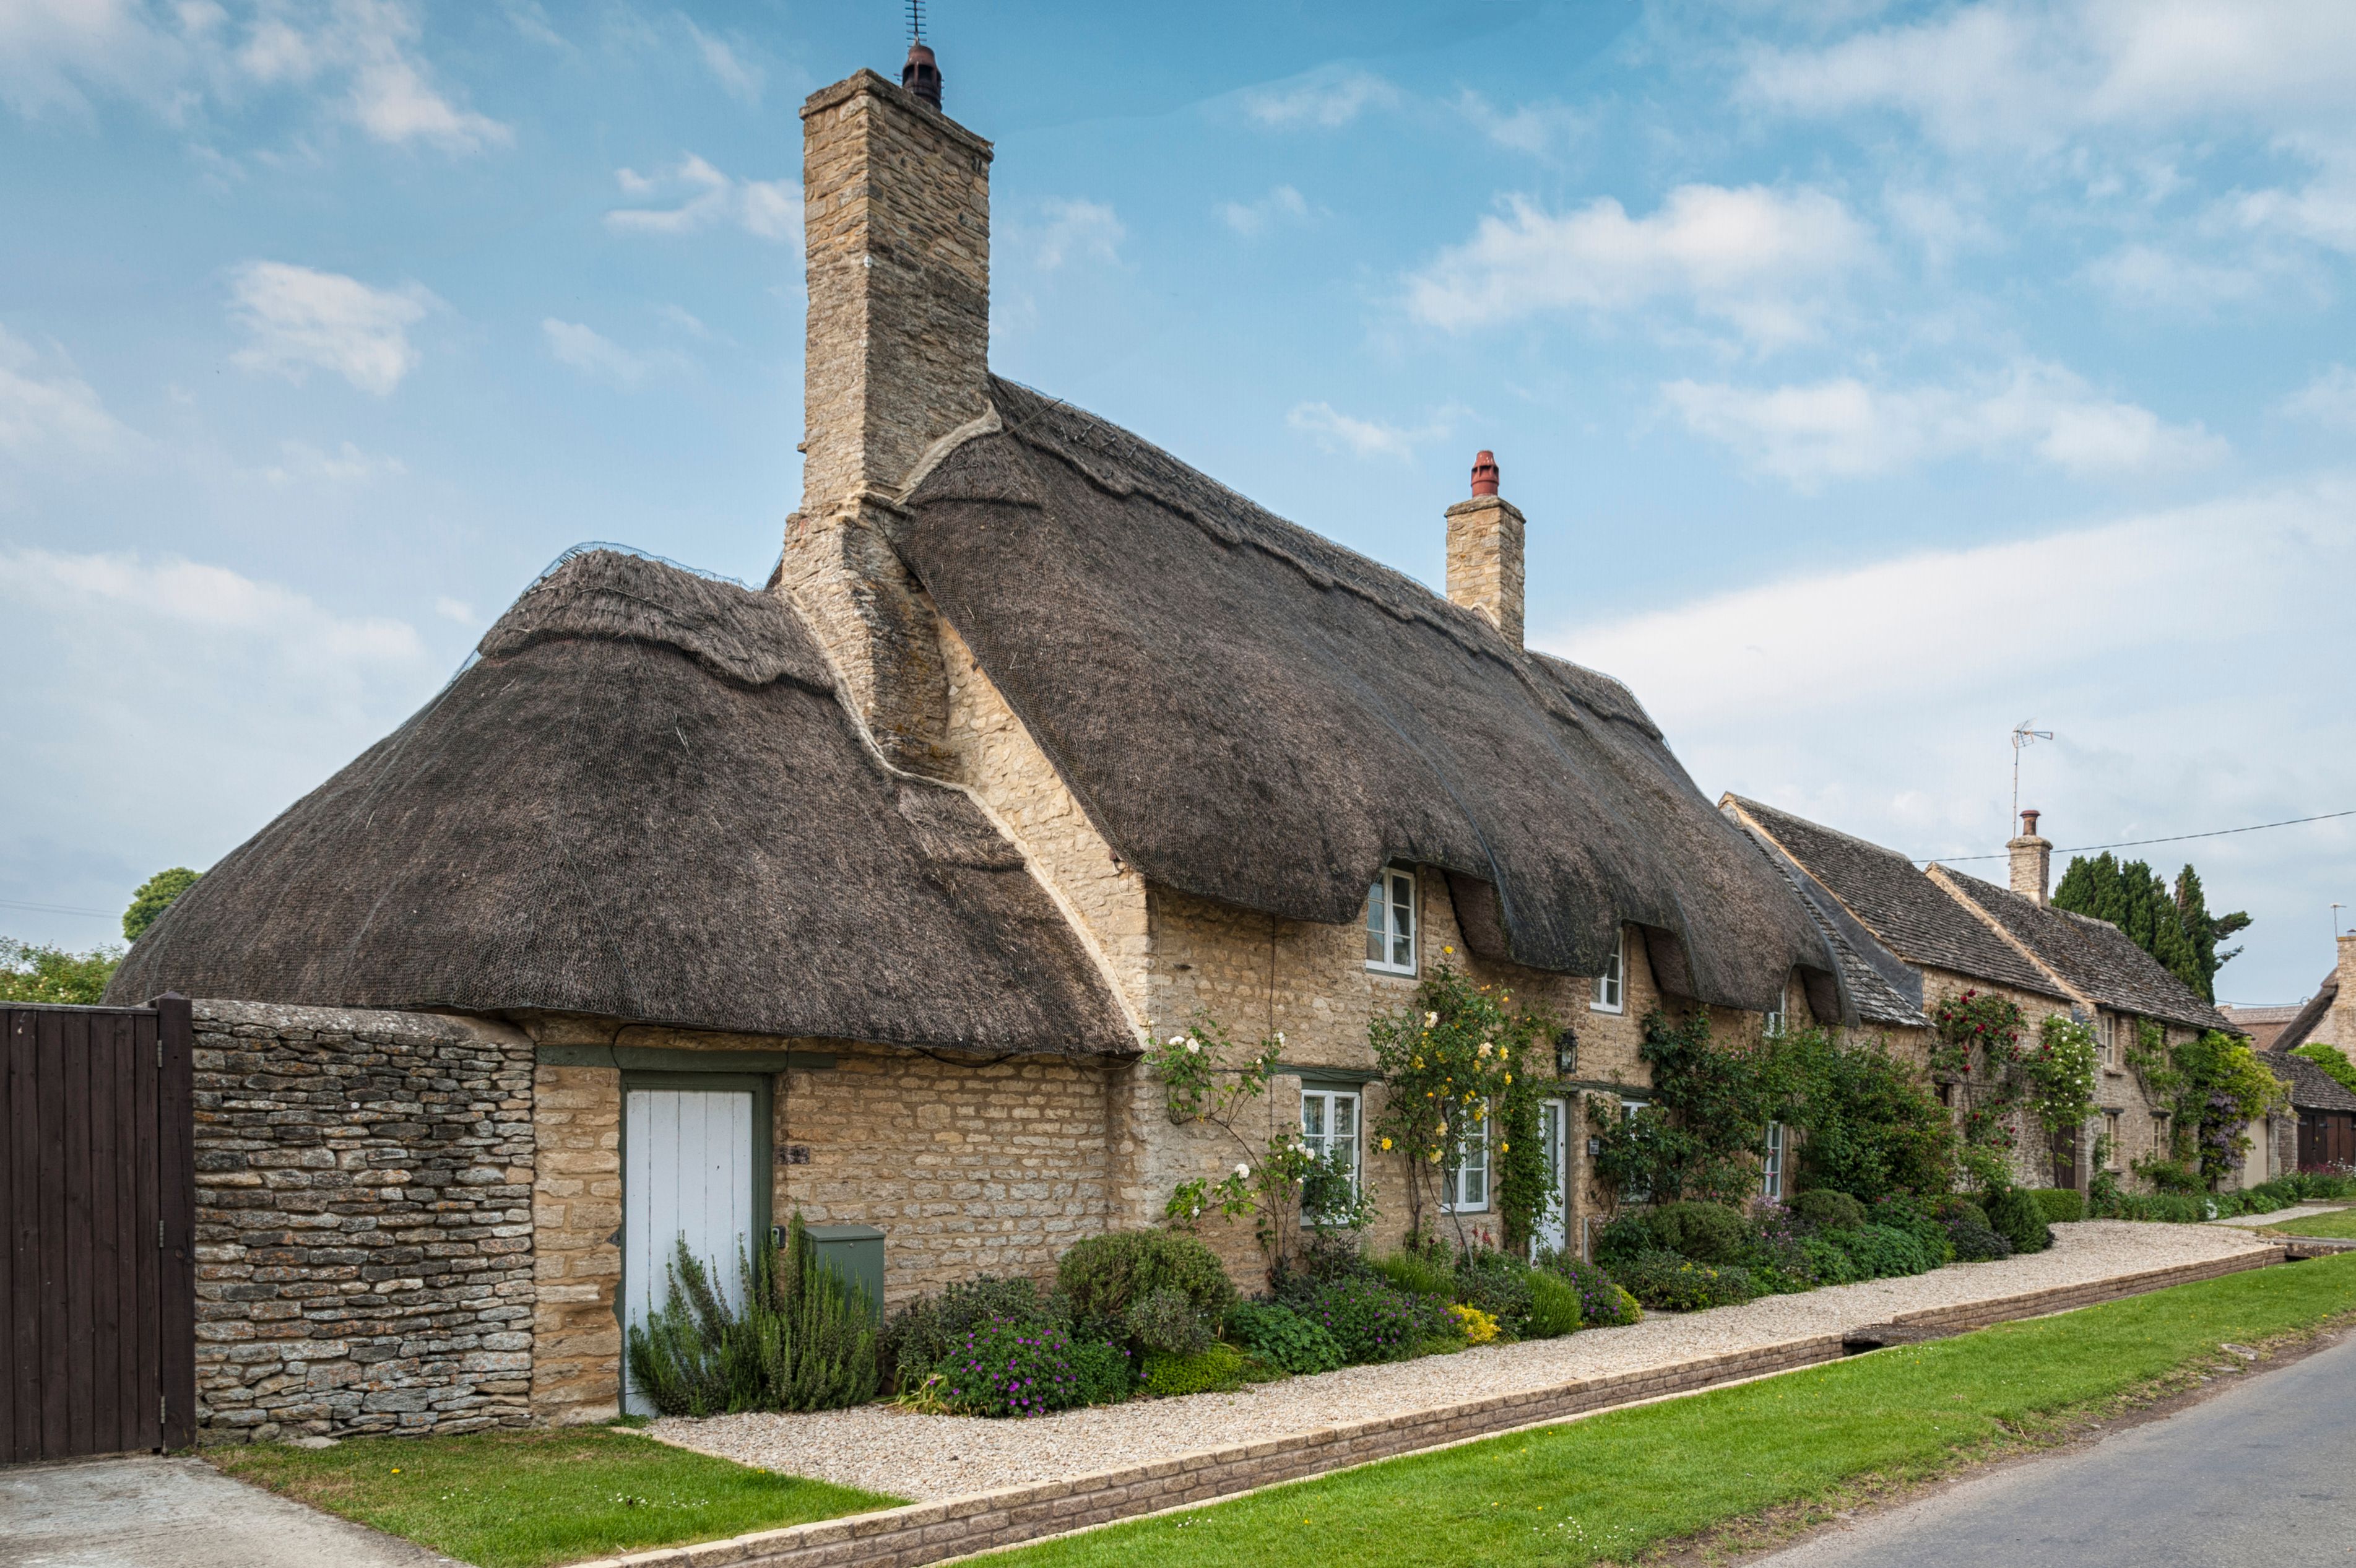 Thatched house with thatched garage. A grass verge separates the property from the road.